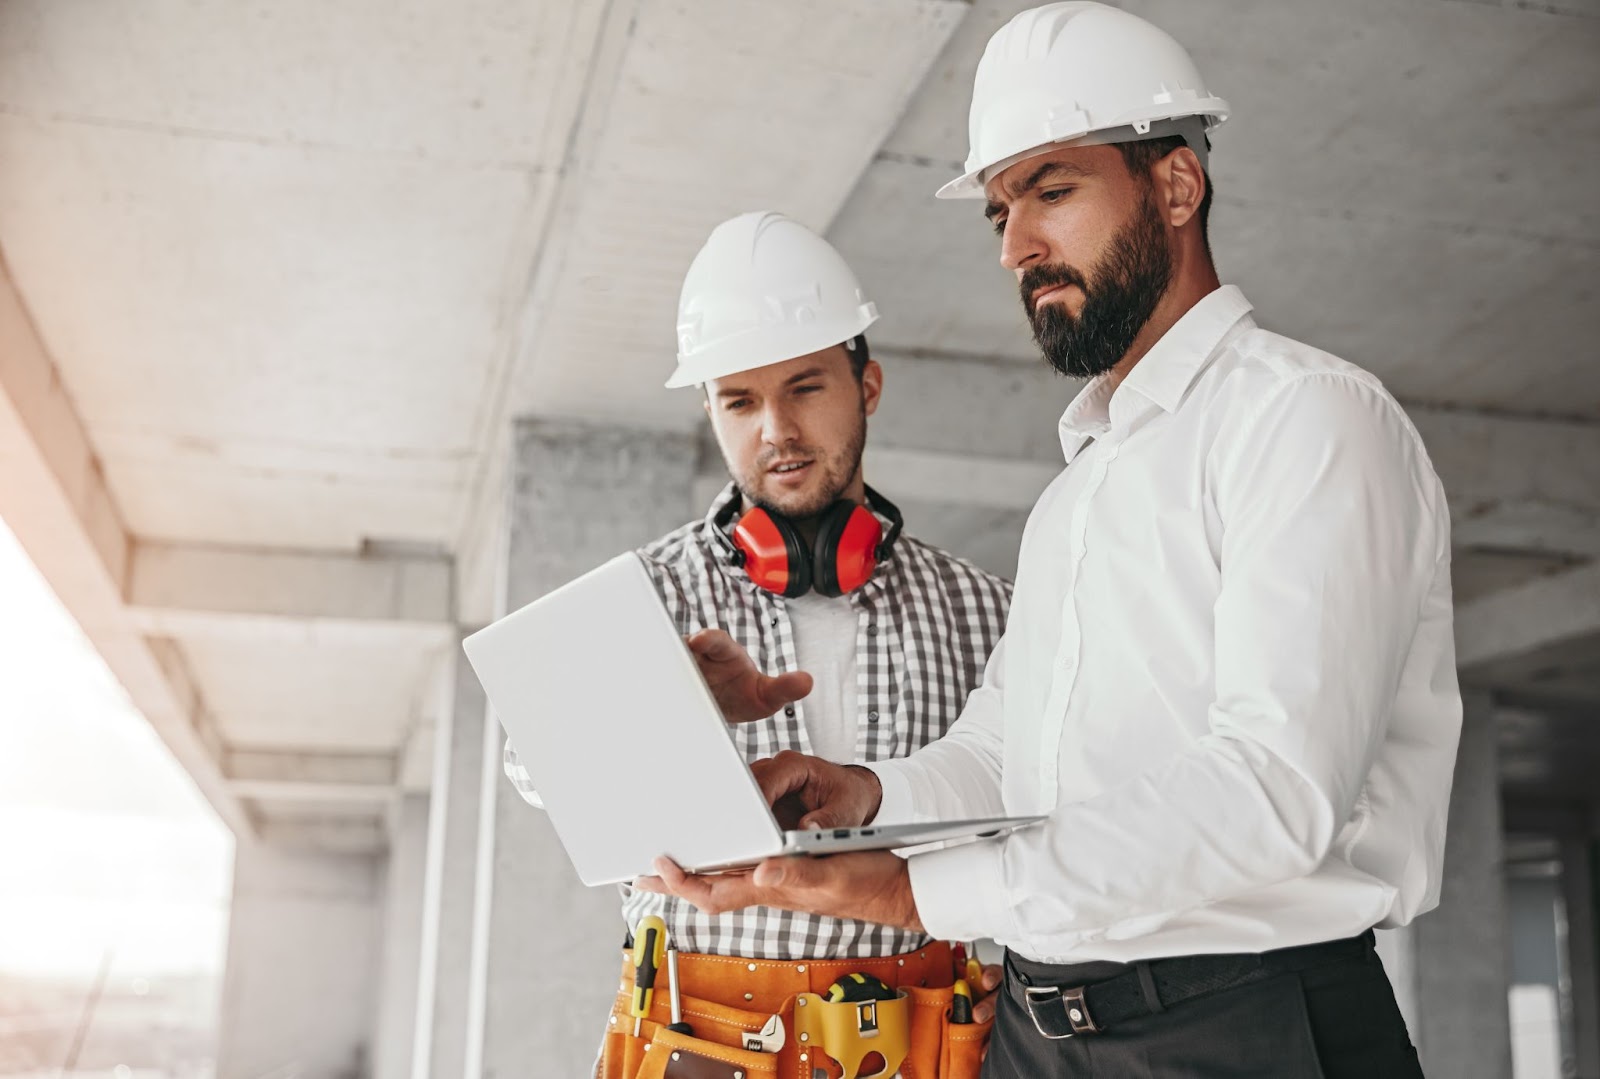 Two people at a construction site discuss some construction processes while looking at the data on a computer.